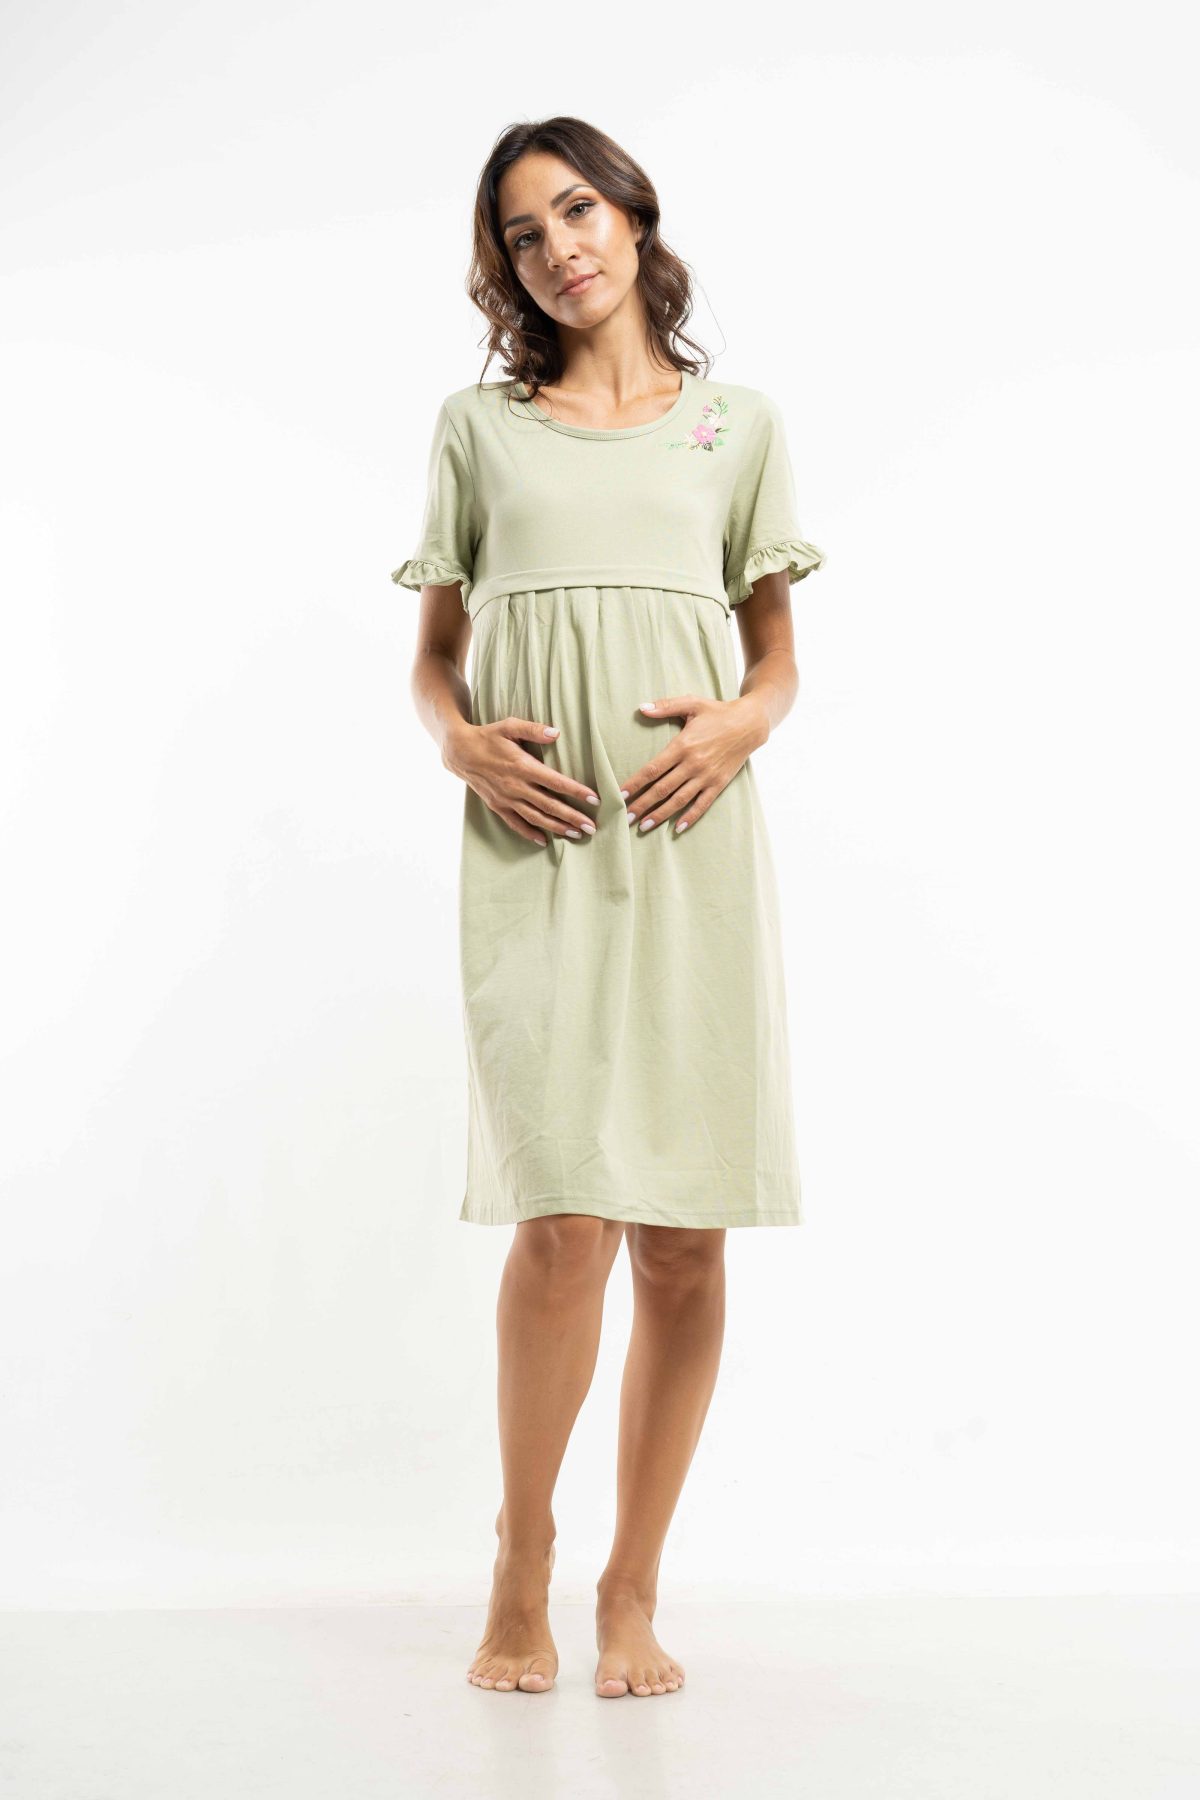 BLOOMS IN MOSS MATERNITY CLOTHES